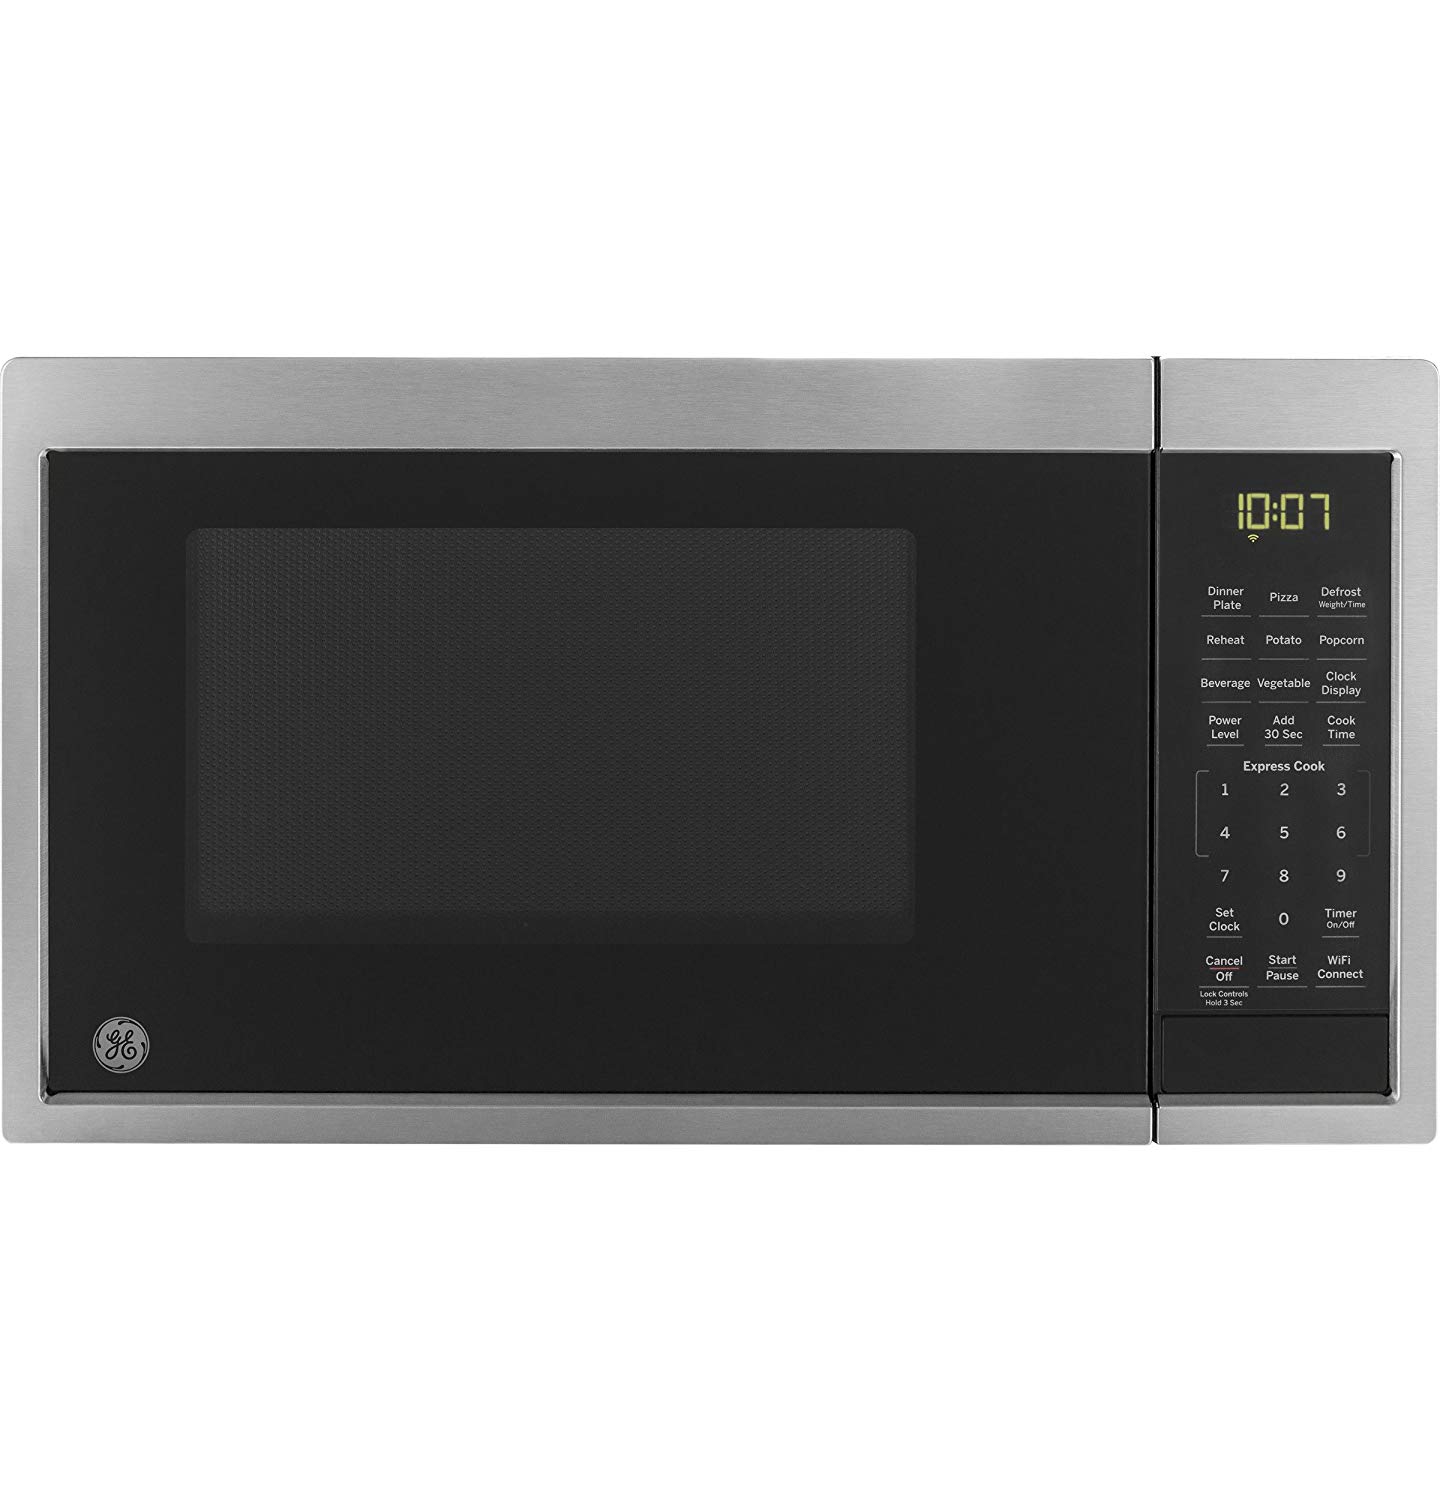 GE JES1097SMSS Smart Countertop Microwave Oven Works with Alexa